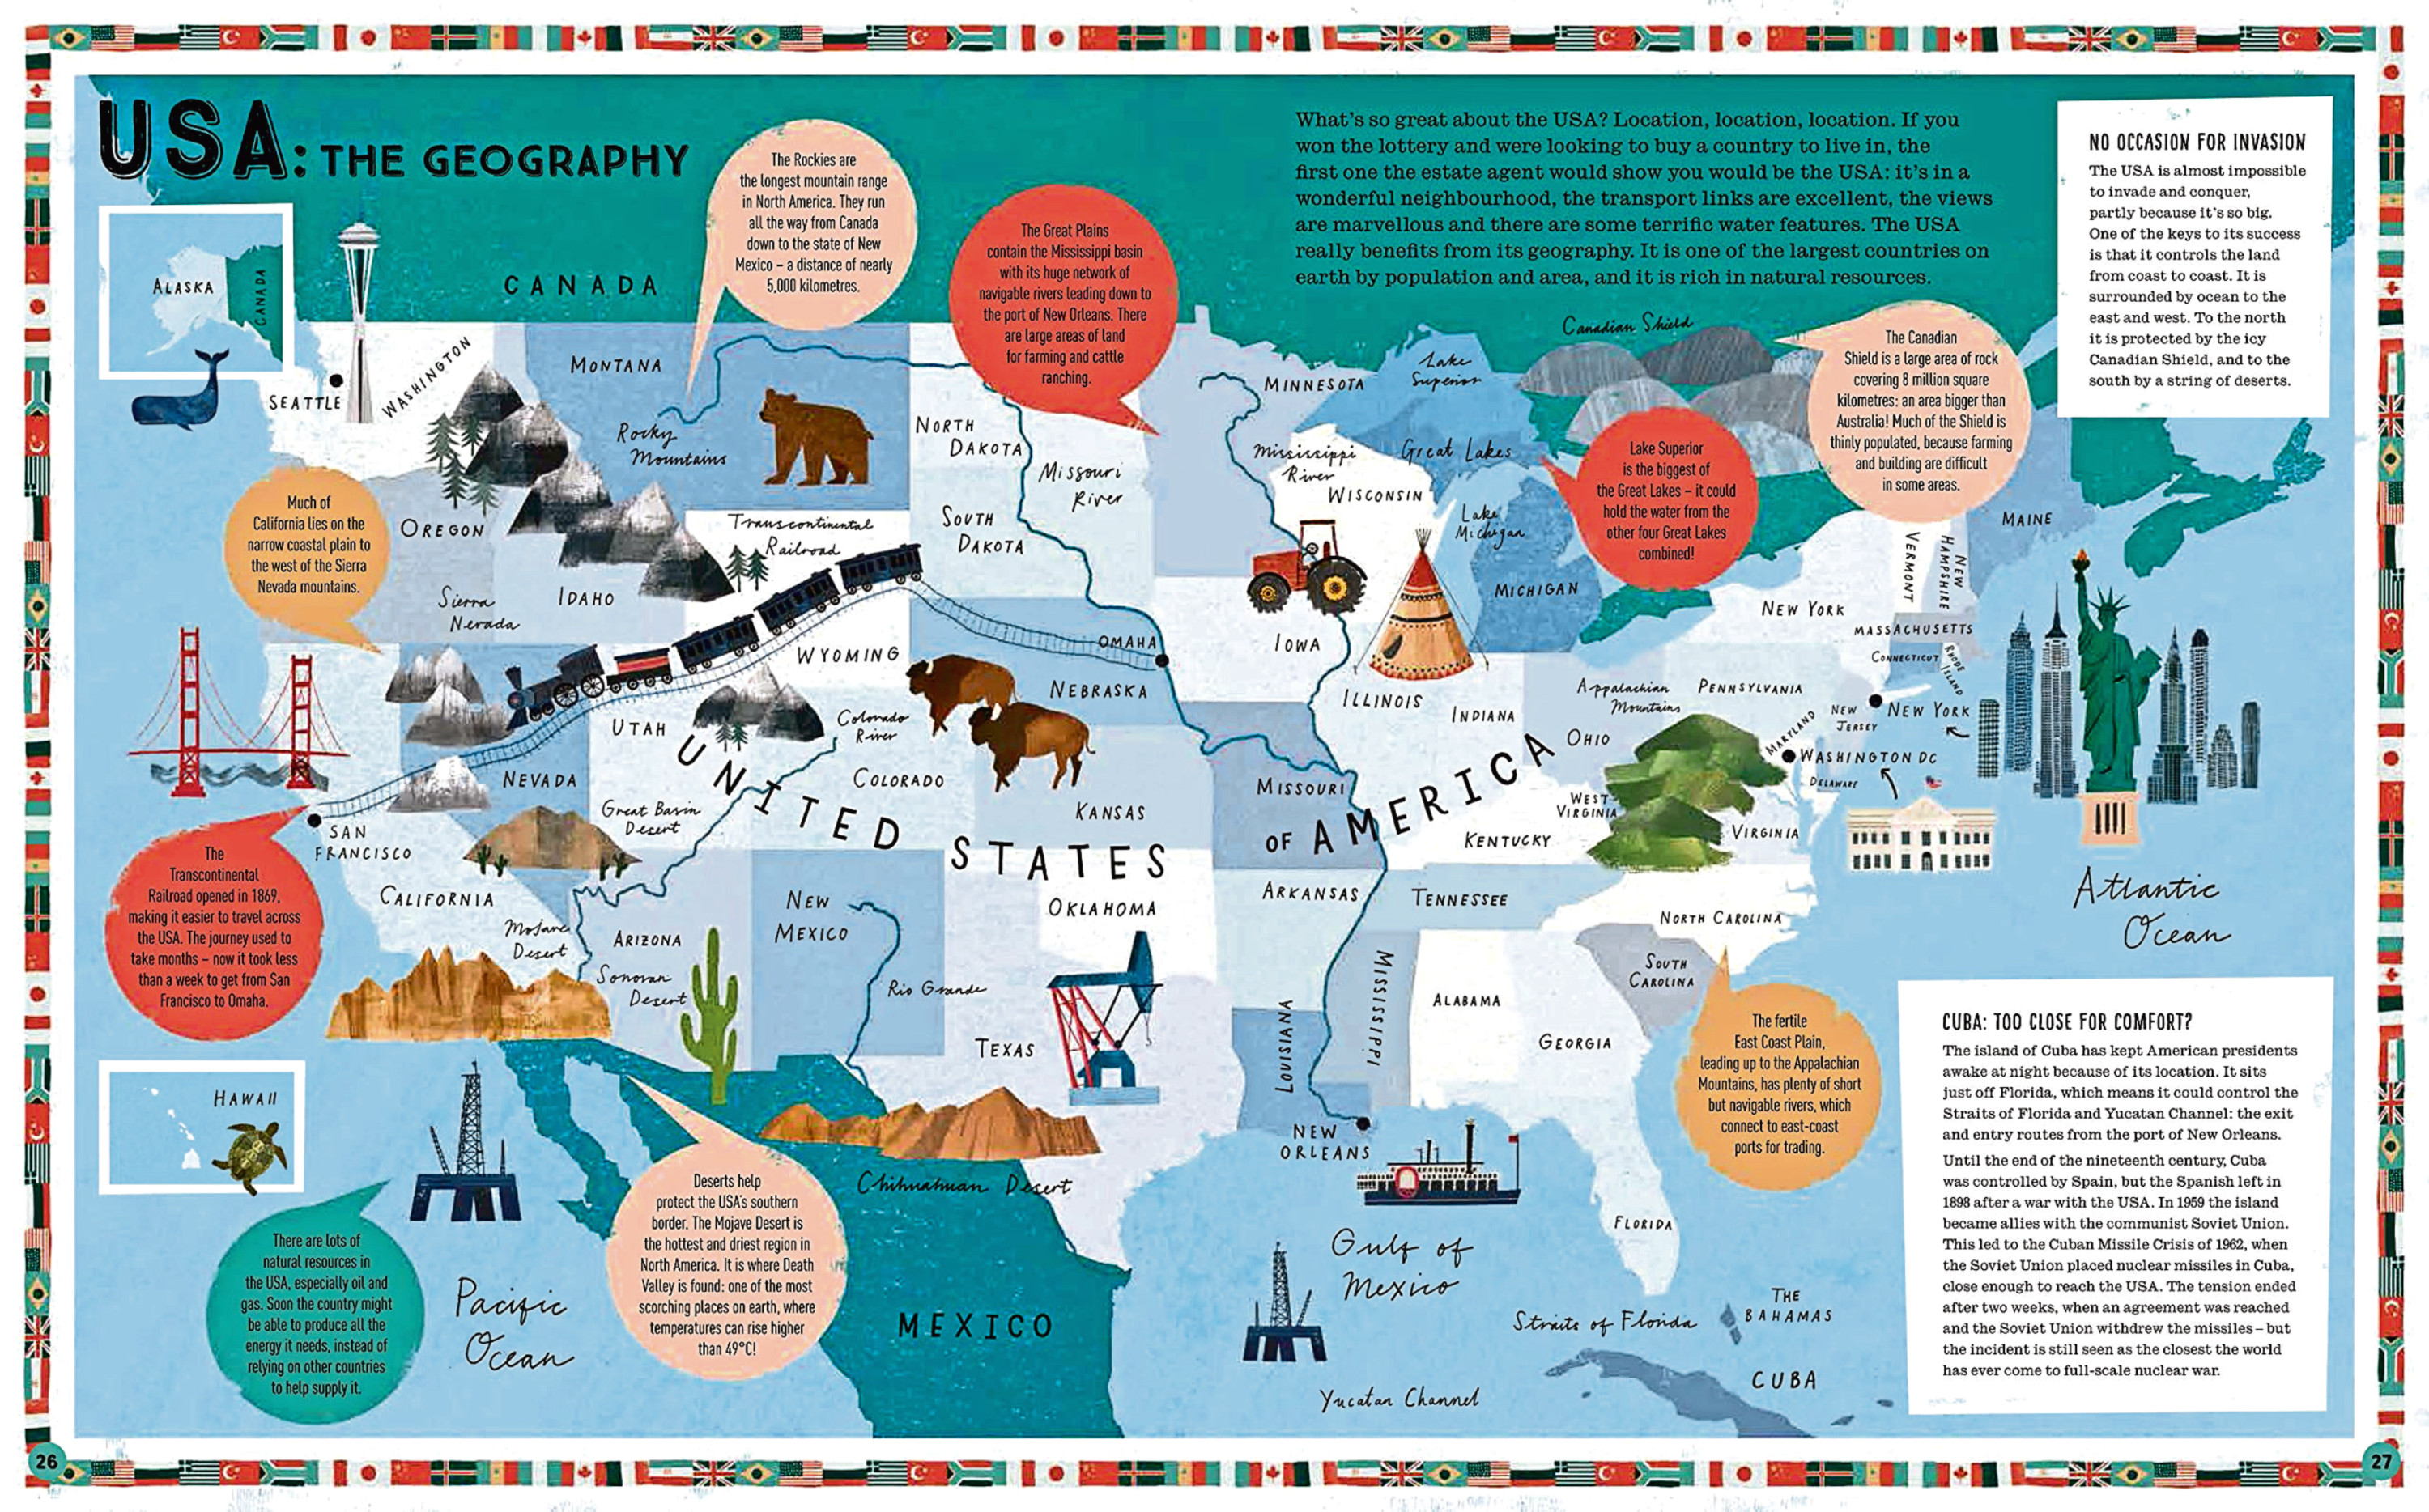 Prisoners of Geography: Our World Explained in 12 Simple Maps By Tim Marshall, illustrated by Grace Easton and Jessica Smith, is published by Simon & Schuster and Elliott & Thompson